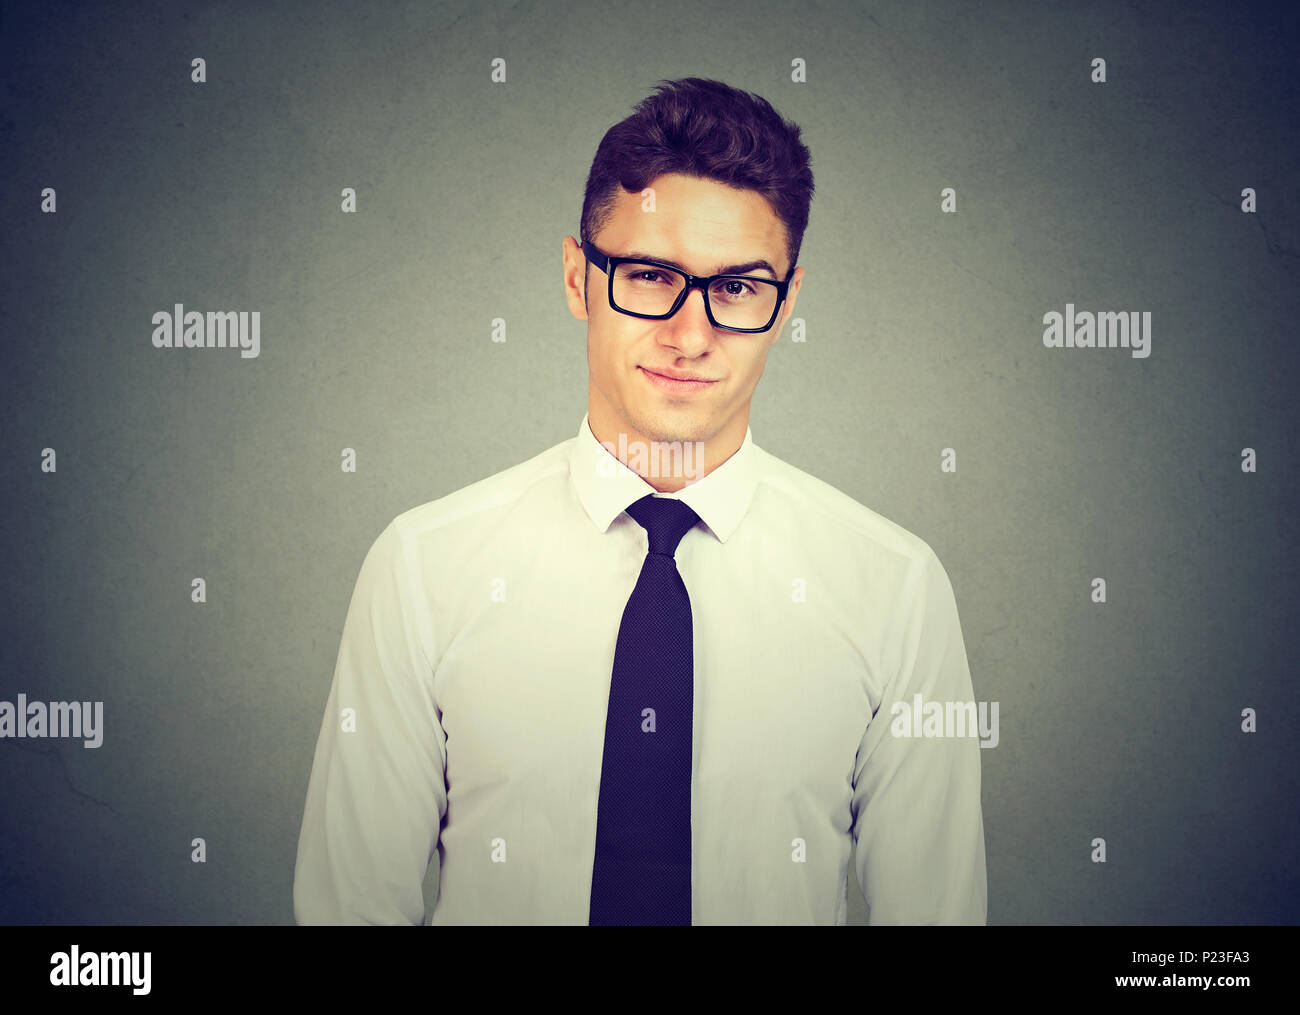 Frowning skeptic man thinking expressing doubts and concerns Stock Photo